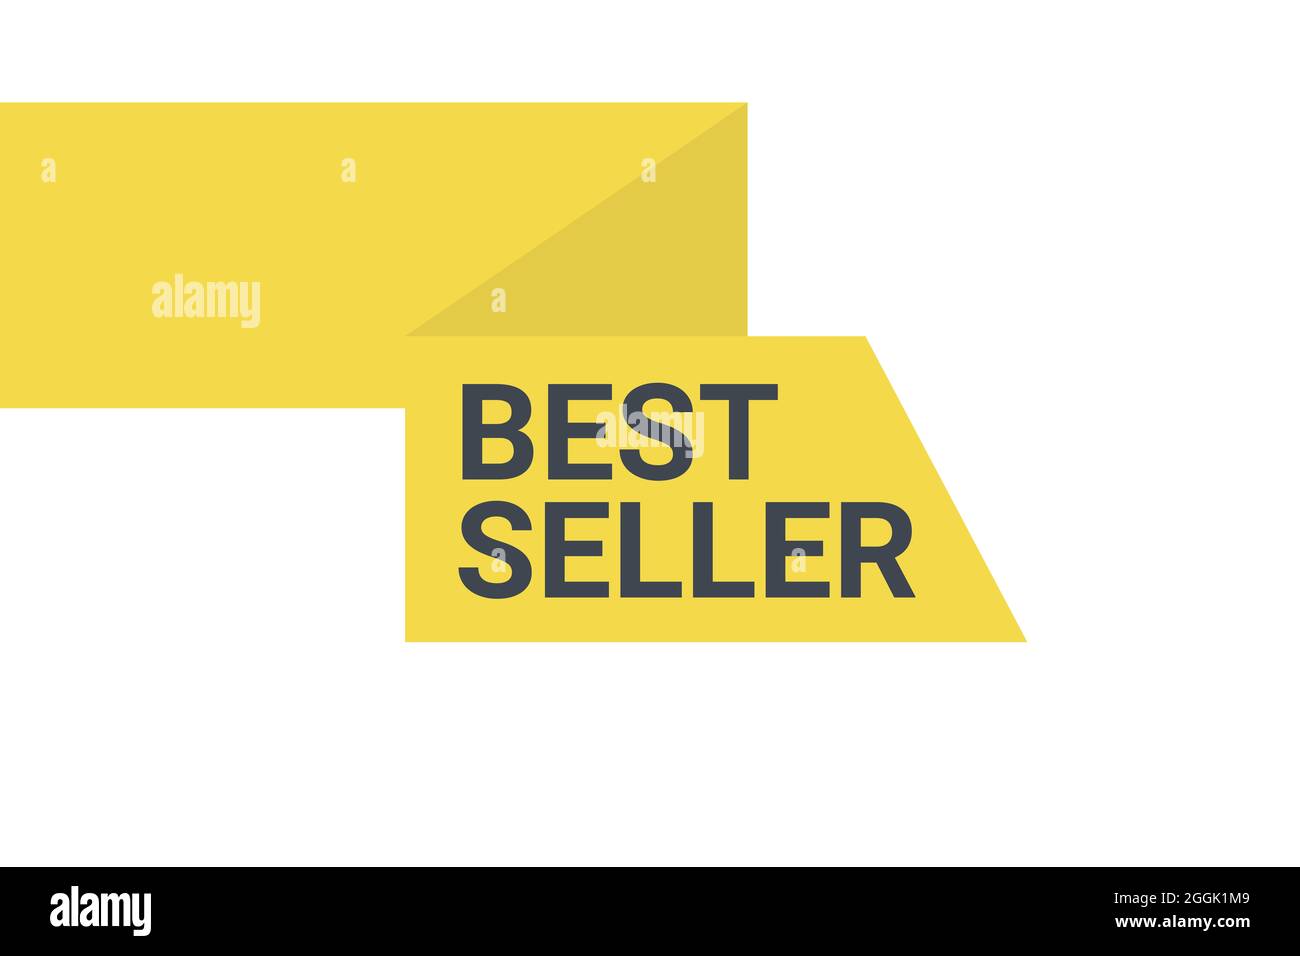 Modern, vibrant, urban graphic design of a banner saying 'Best Seller' in yellow and grey colors. Simple, bold graphic vector art. Stock Photo